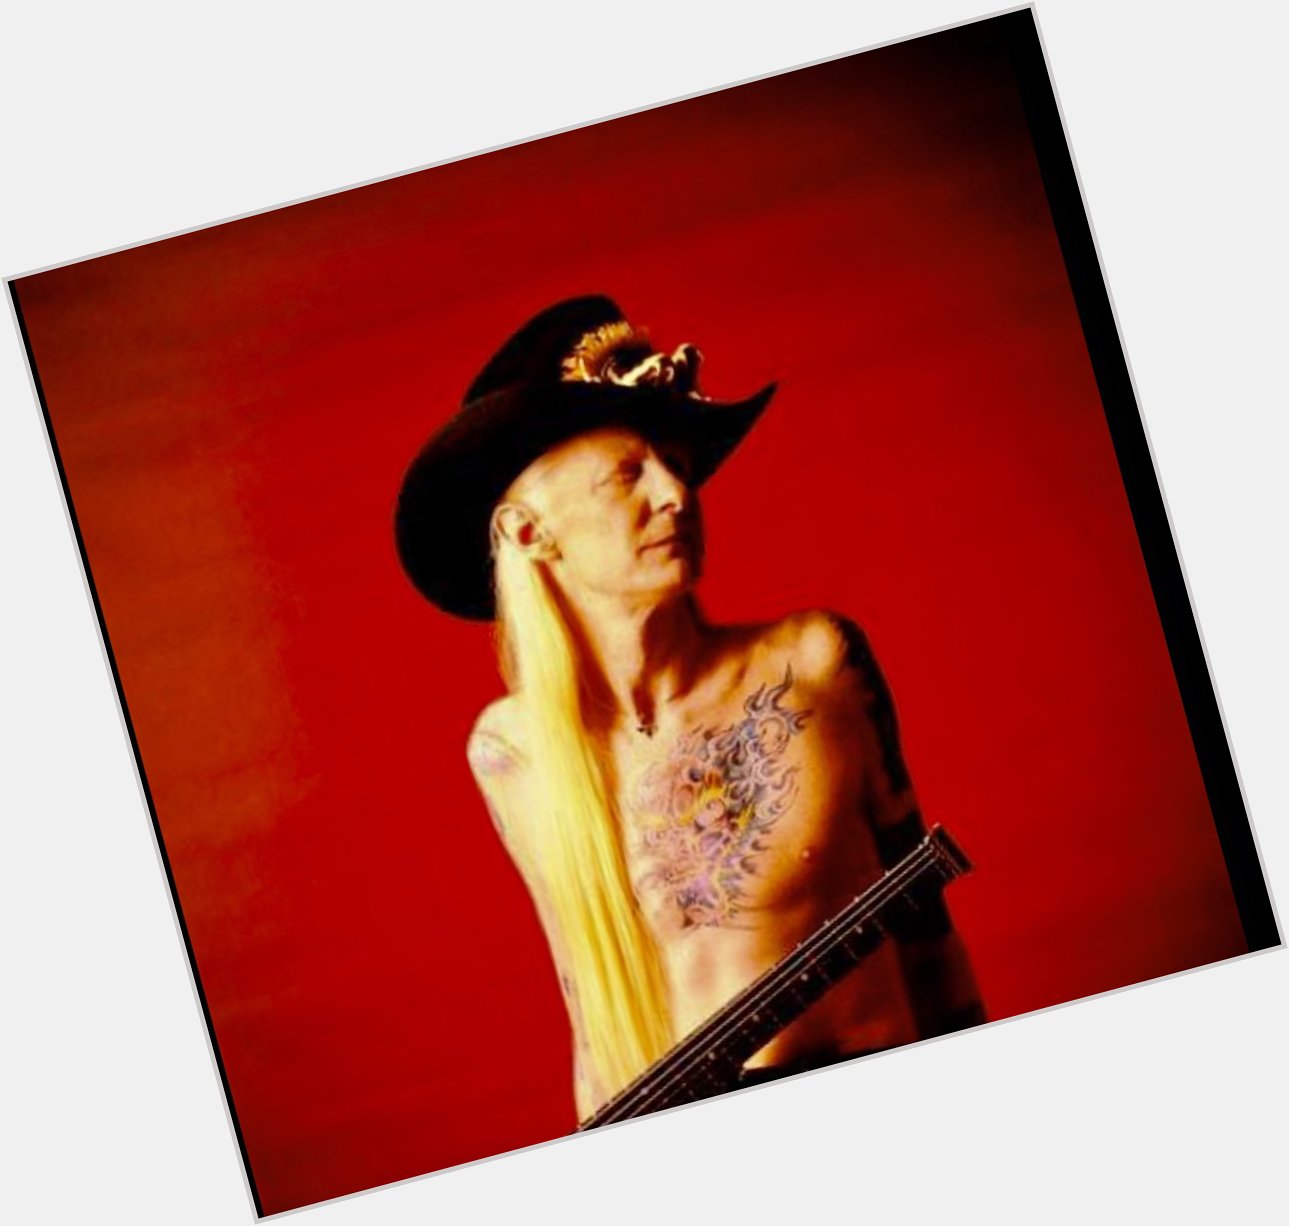 Wishing a very happy belated birthday to the great Johnny Winter! 